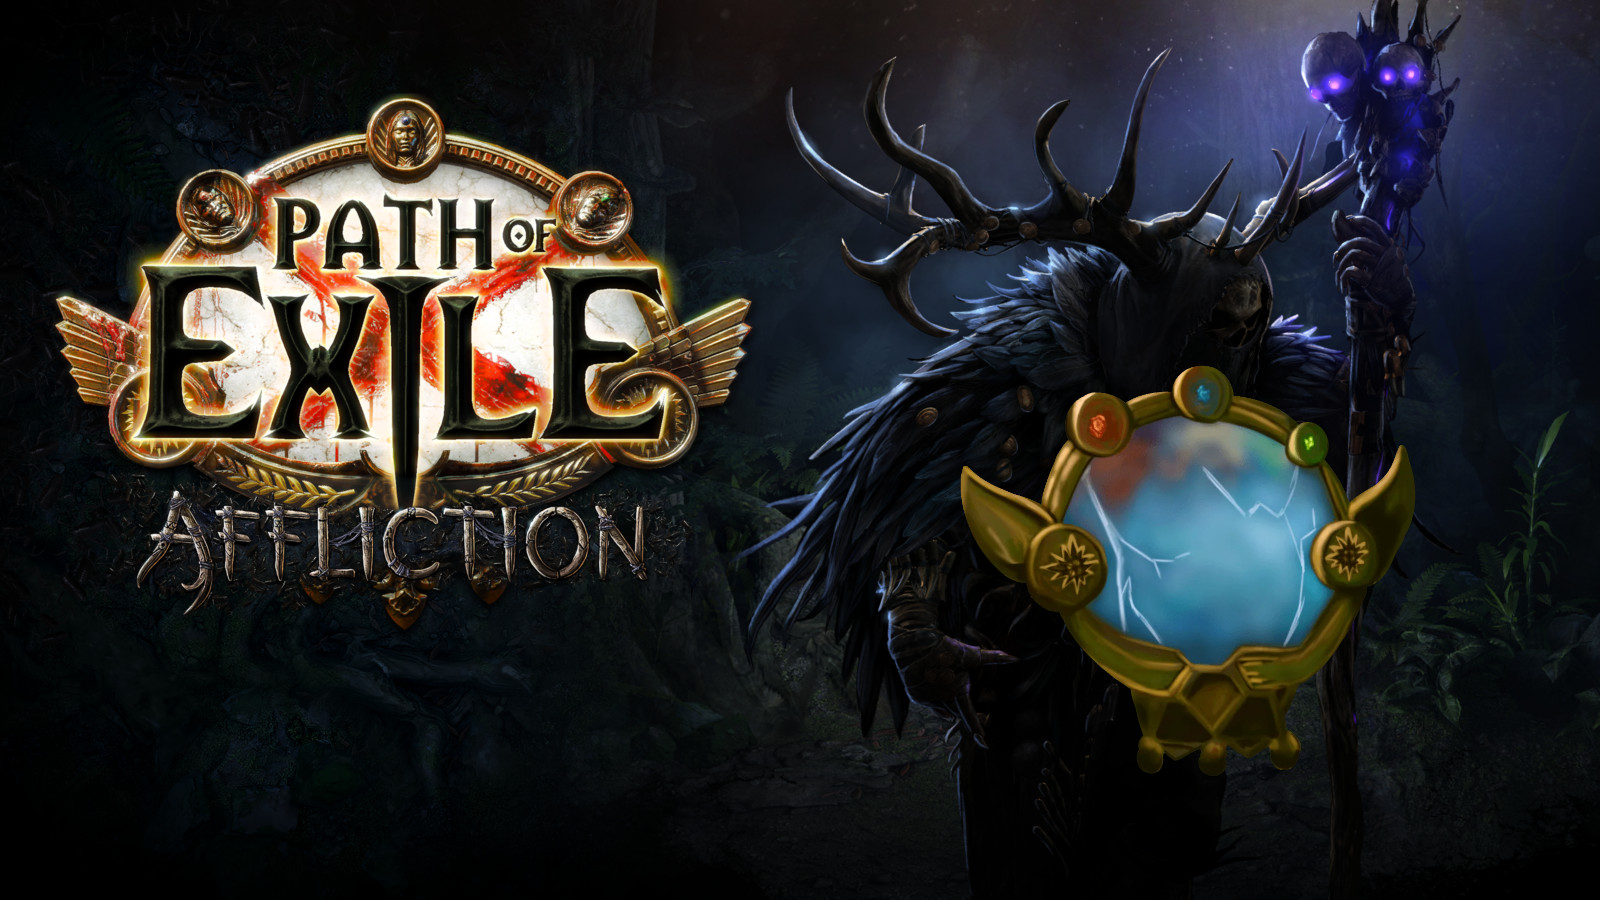 Path of Exile Affliction - 1 Mirror of Kalandra - PC 60.62 $